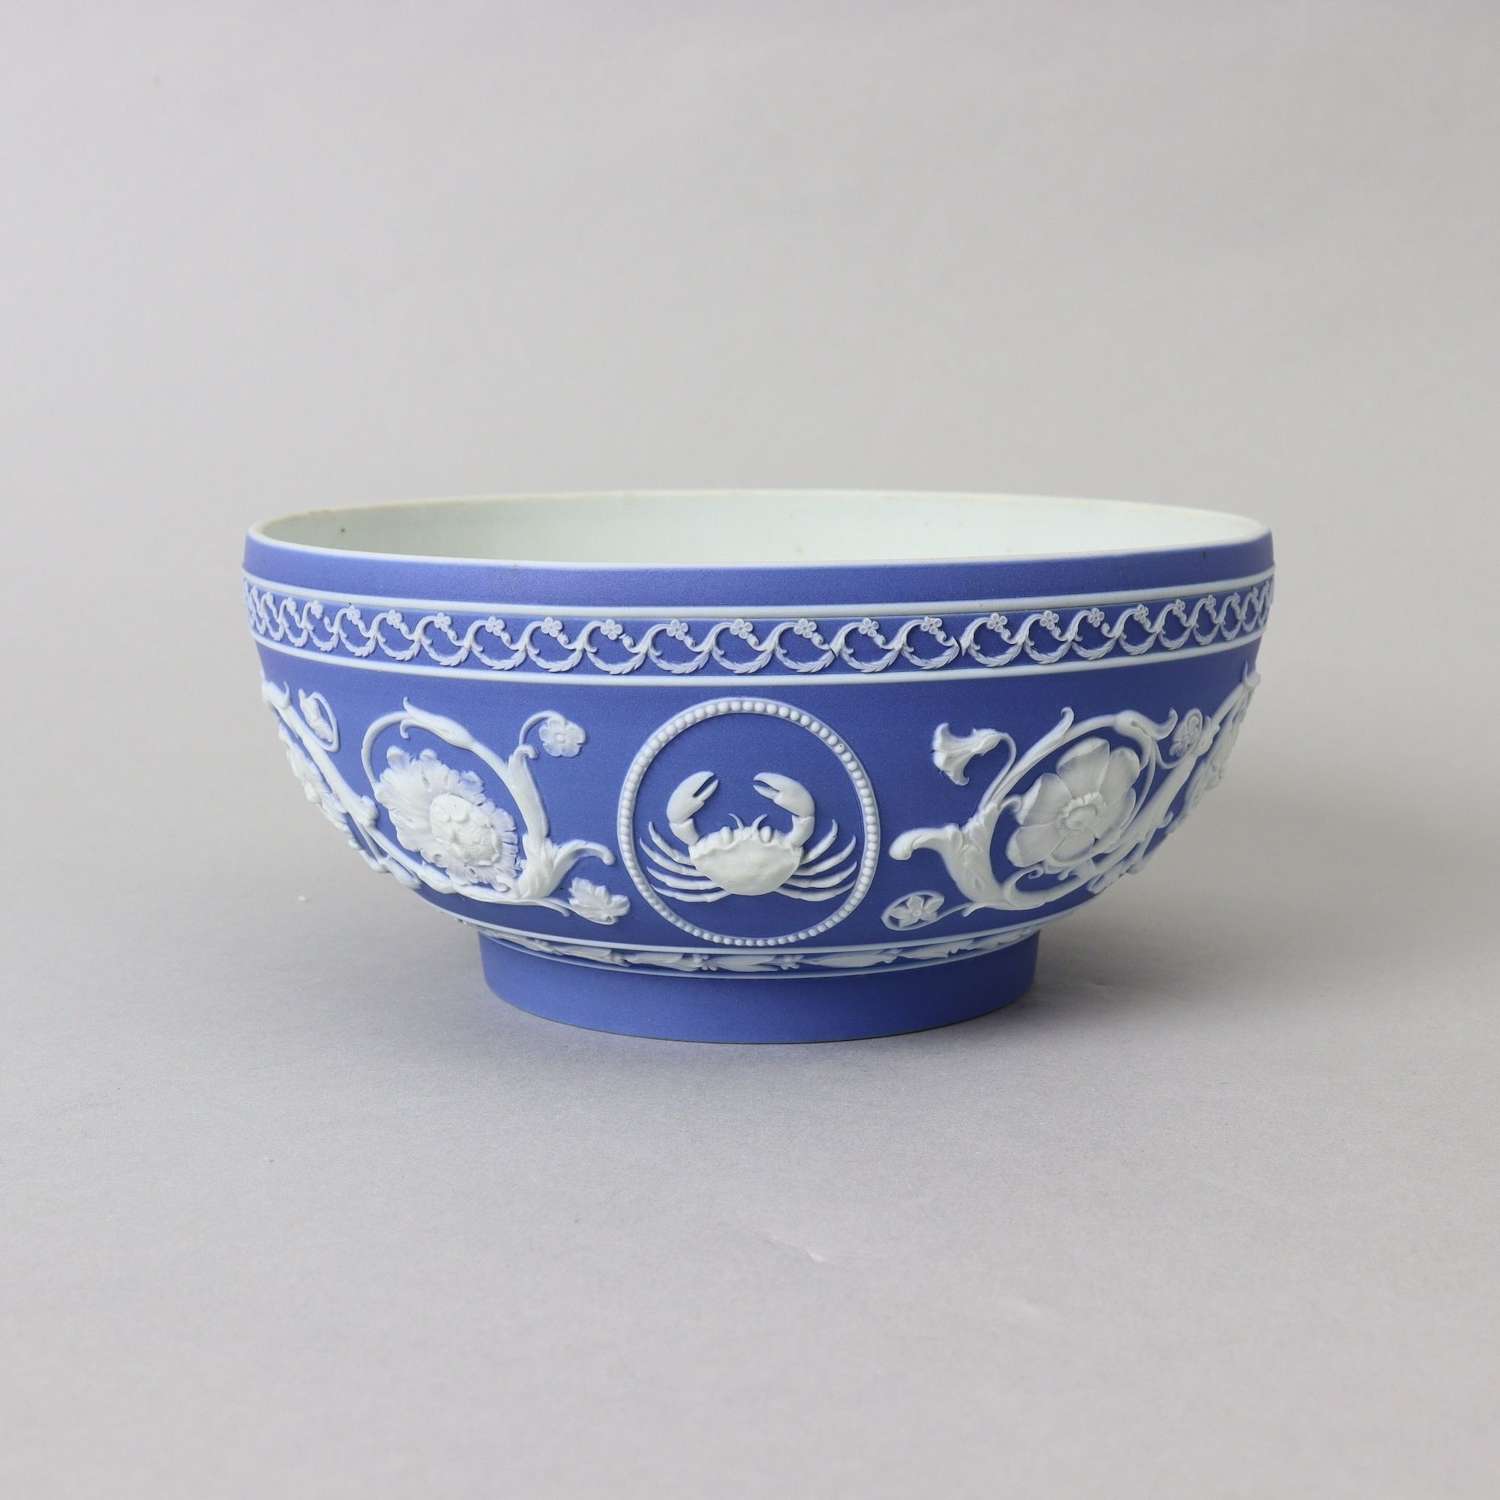 18th Century Bowl depicting Cancer